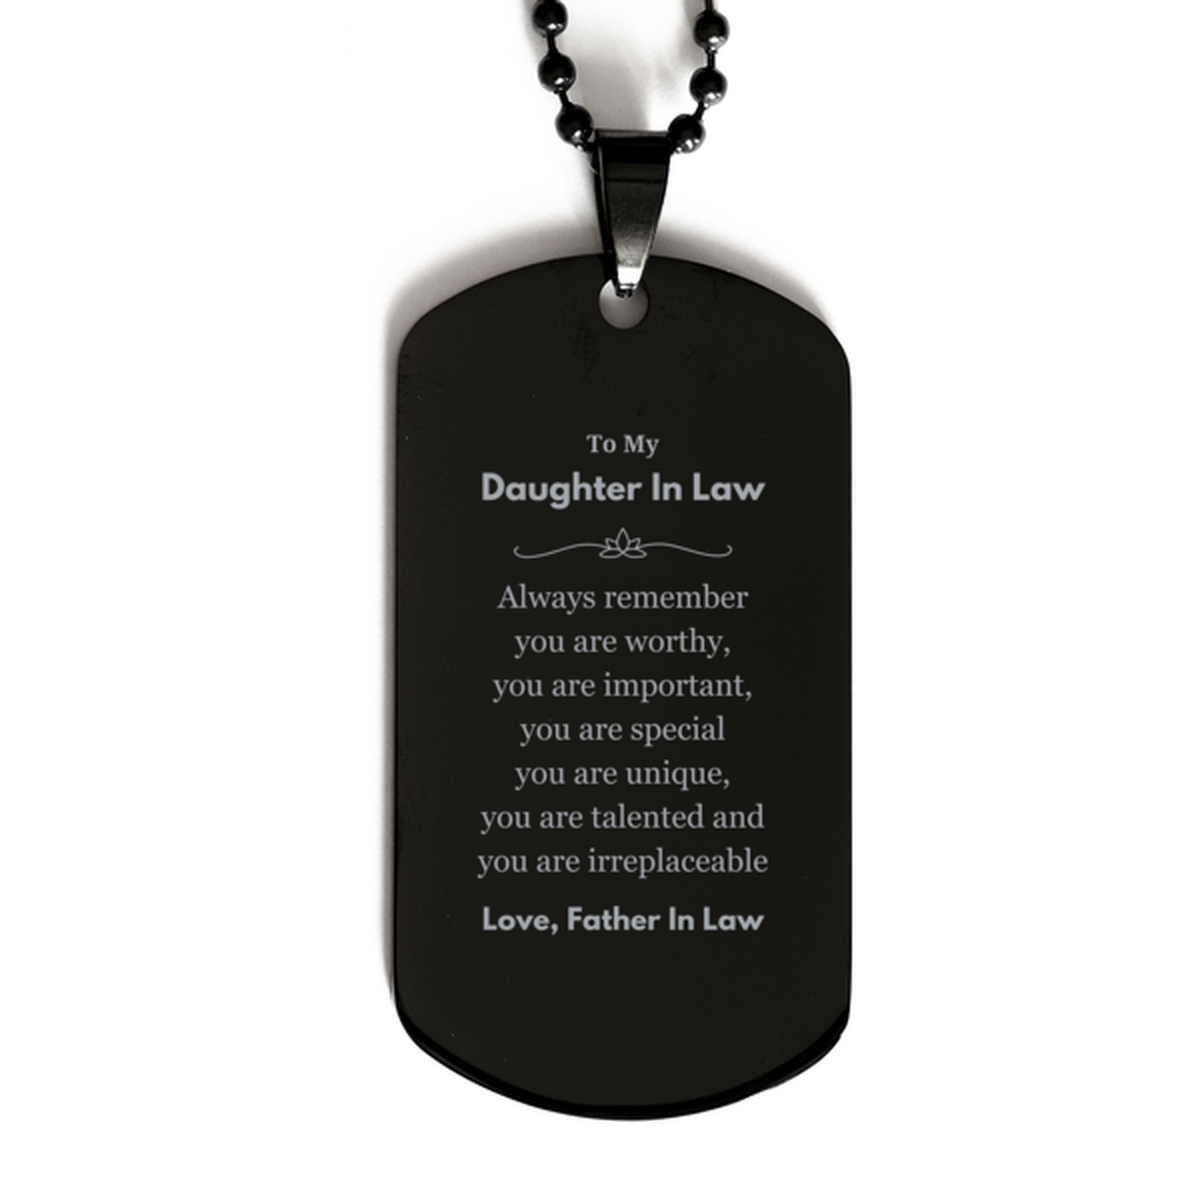 Daughter In Law Birthday Gifts from Father In Law, Inspirational Black Dog Tag for Daughter In Law Christmas Graduation Gifts for Daughter In Law Always remember you are worthy, you are important. Love, Father In Law